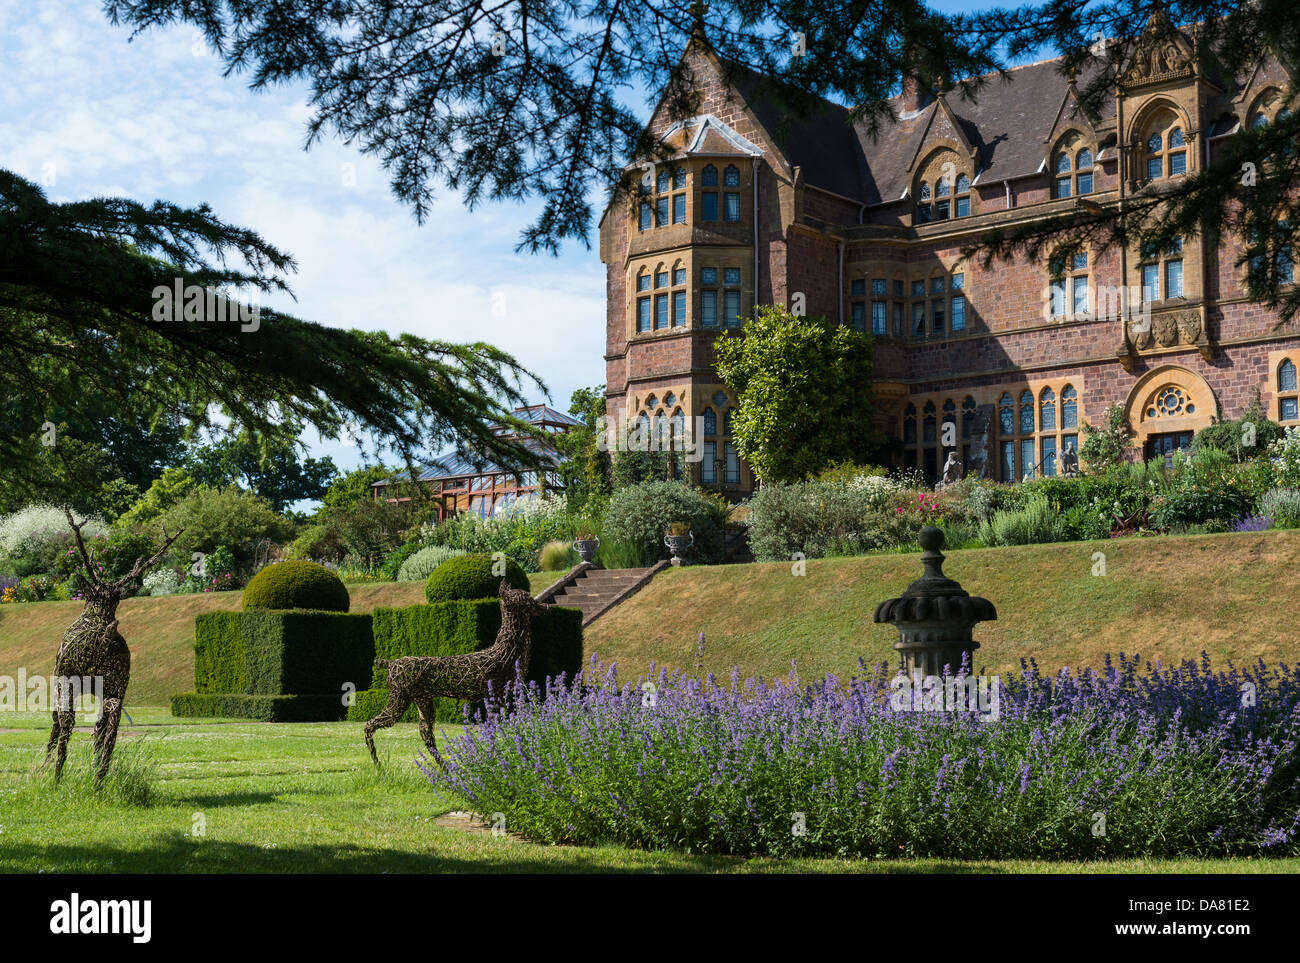 Bolham, Tiverton, Devon, UK. July 5th 2013. The front of Knightshayes Court and part of the formal gardens. Stock Photo